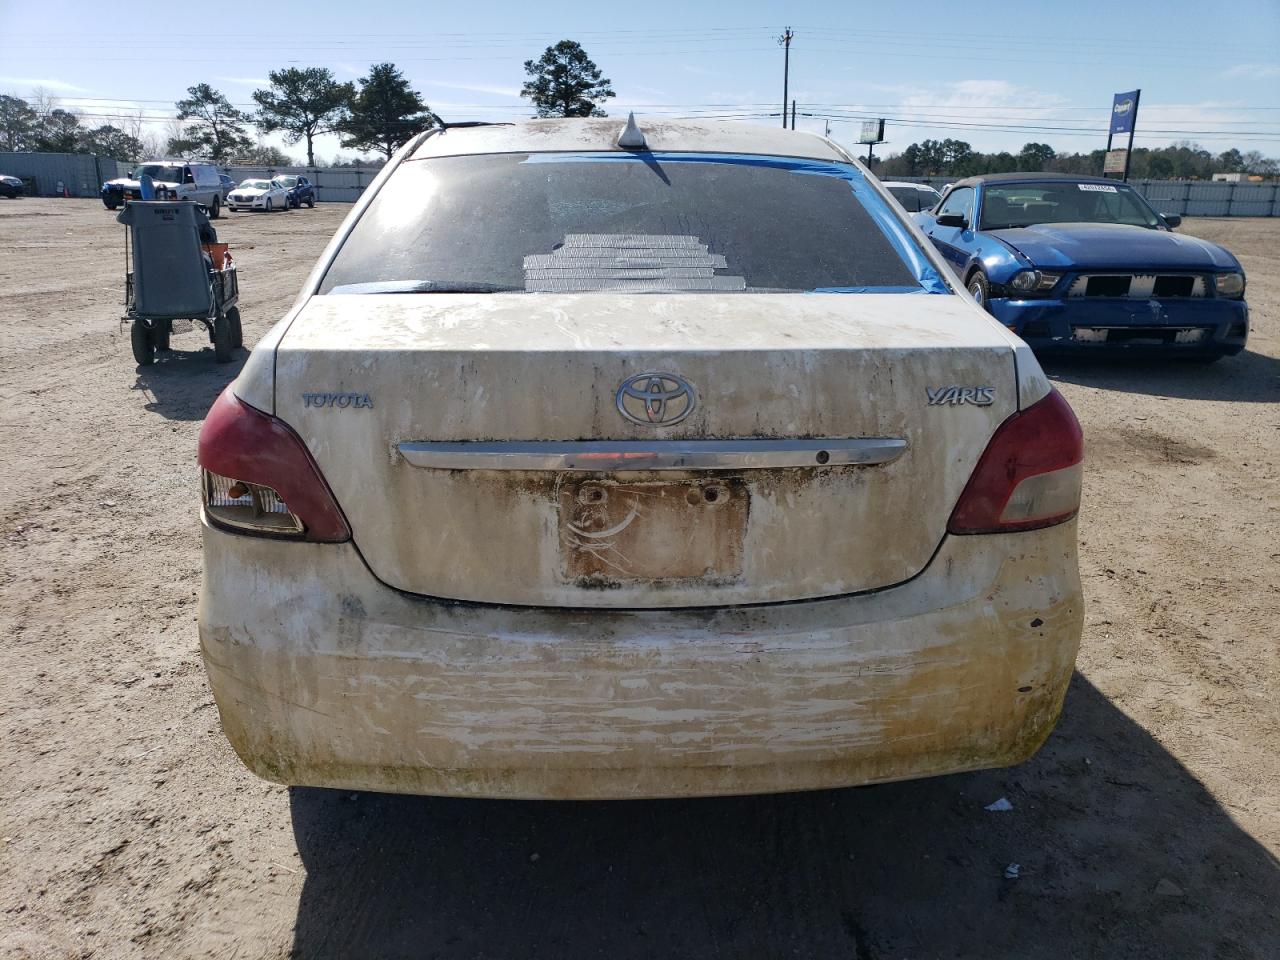 JTDBT923171****** Salvage and Repairable 2007 Toyota Yaris in Alabama State